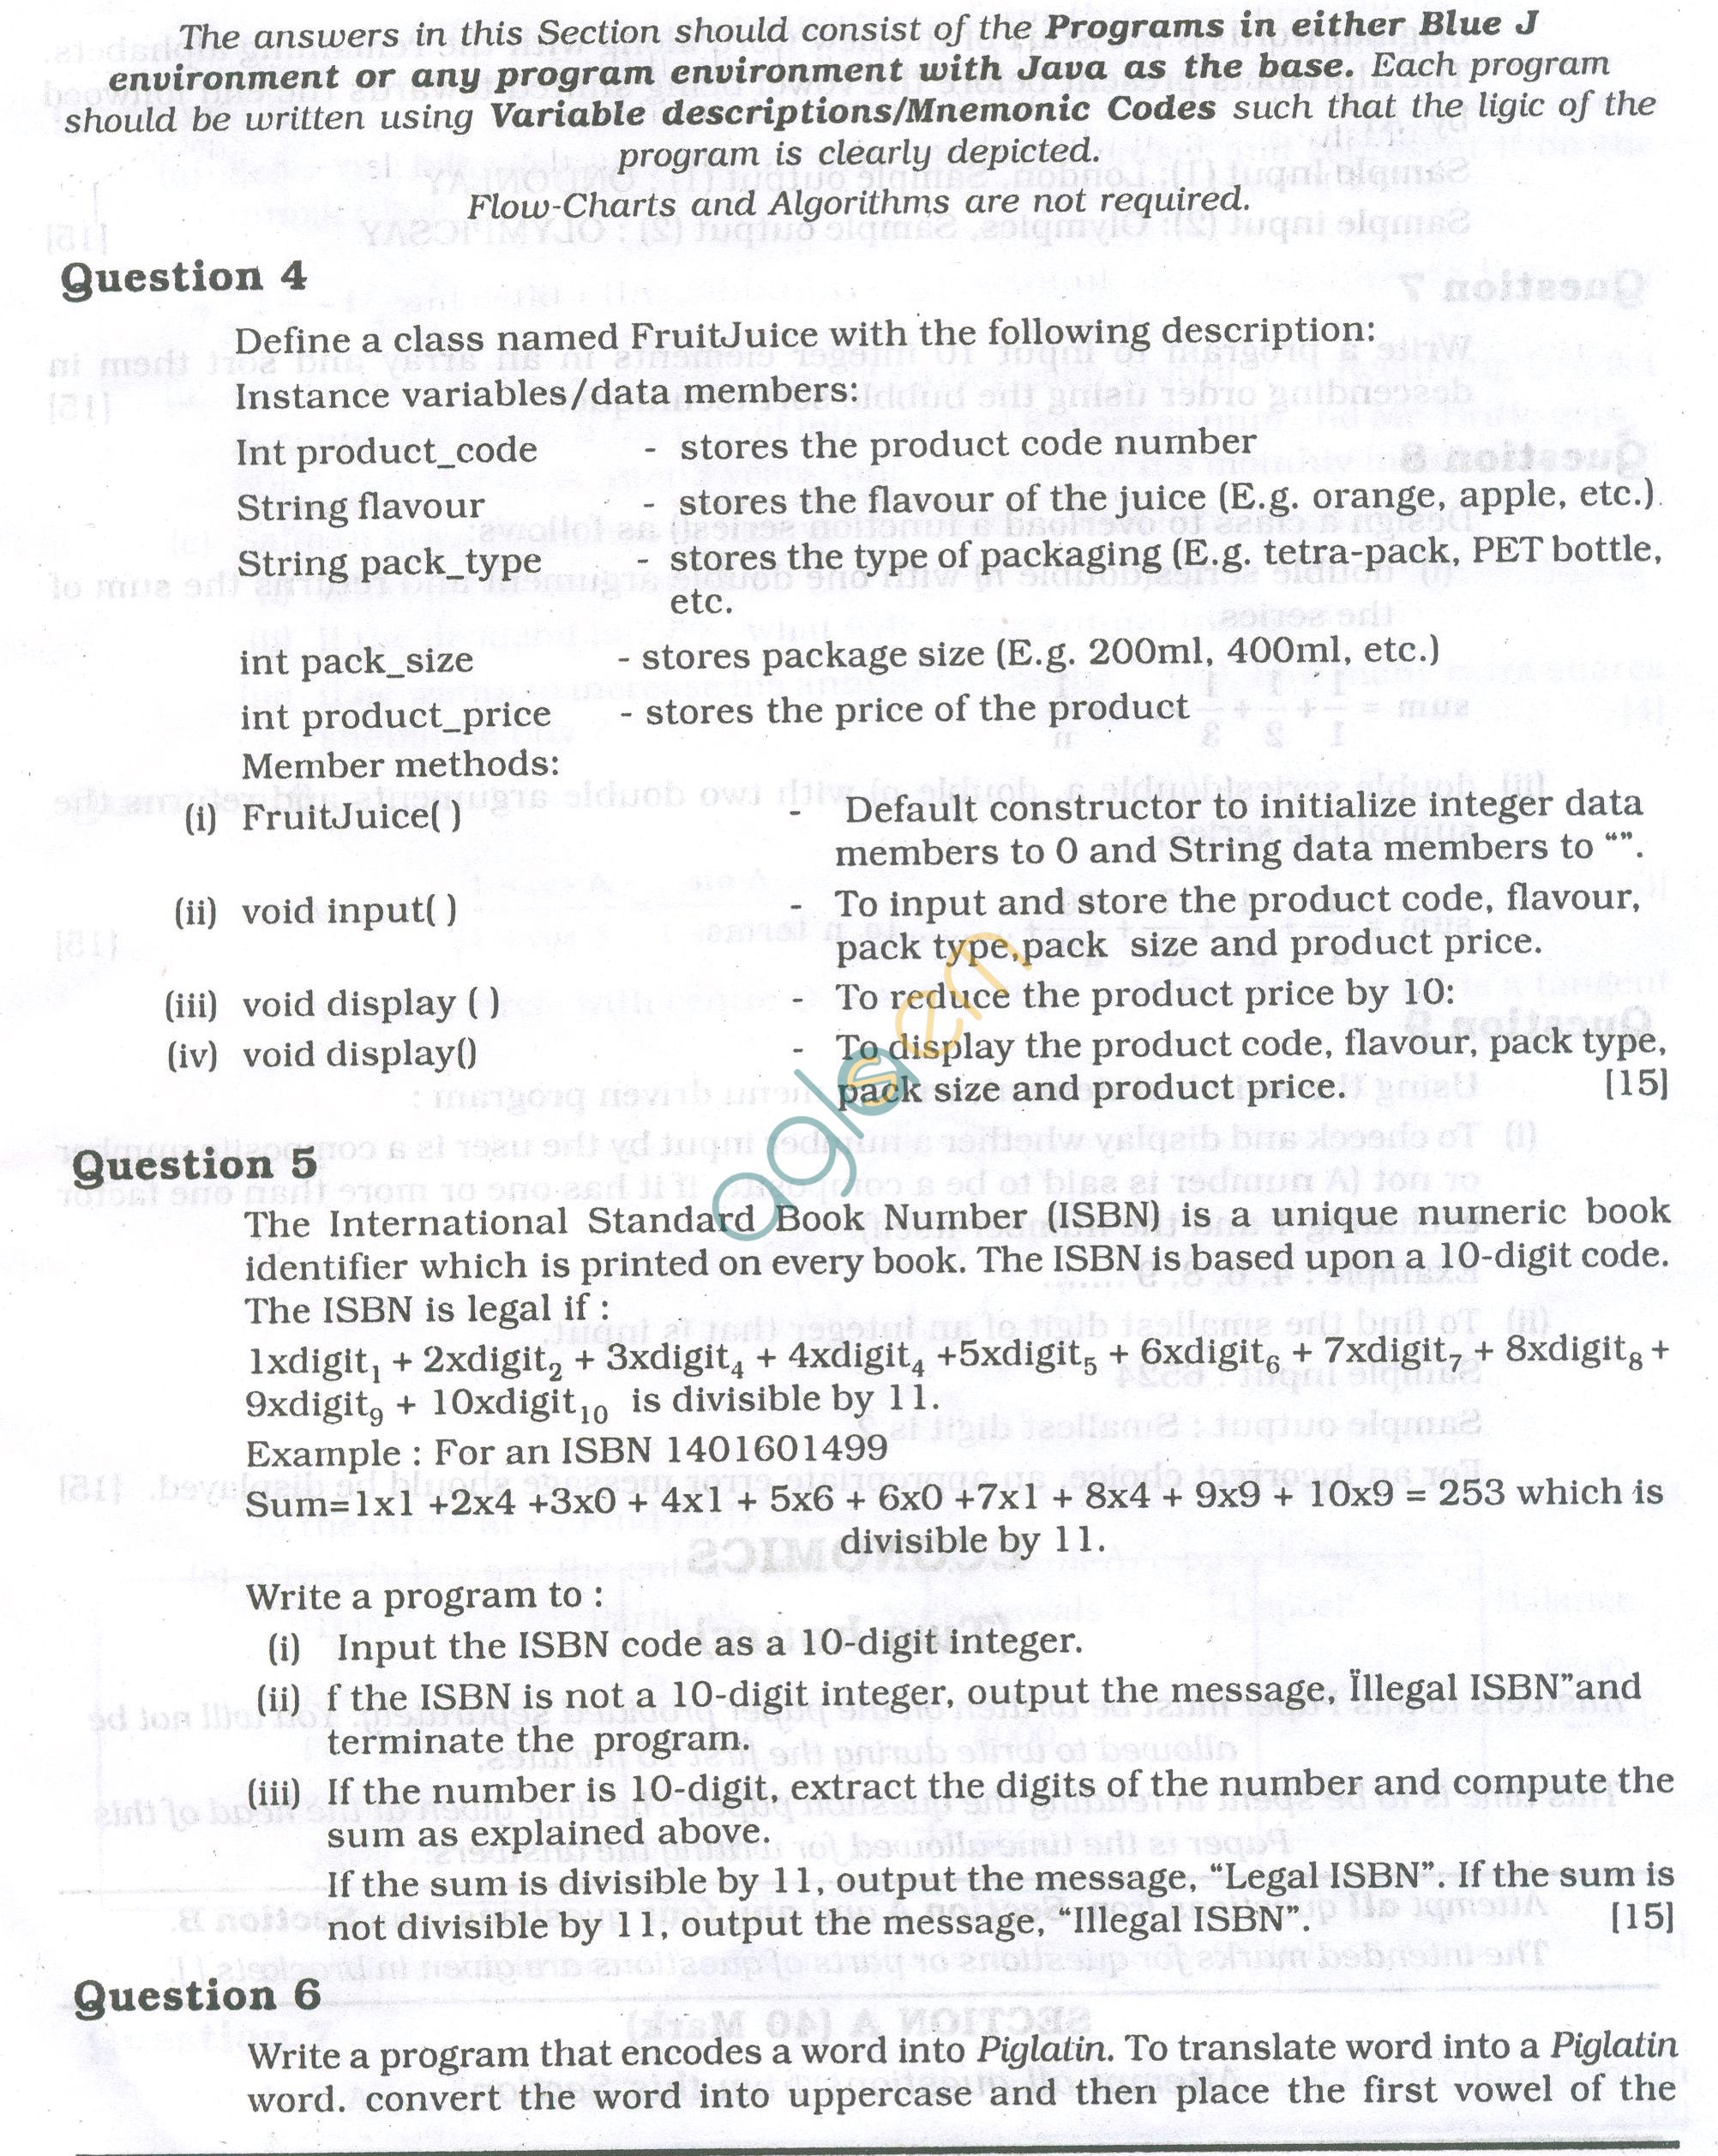 ICSE Question Papers 2013 for Class 10 - Computer Applications/